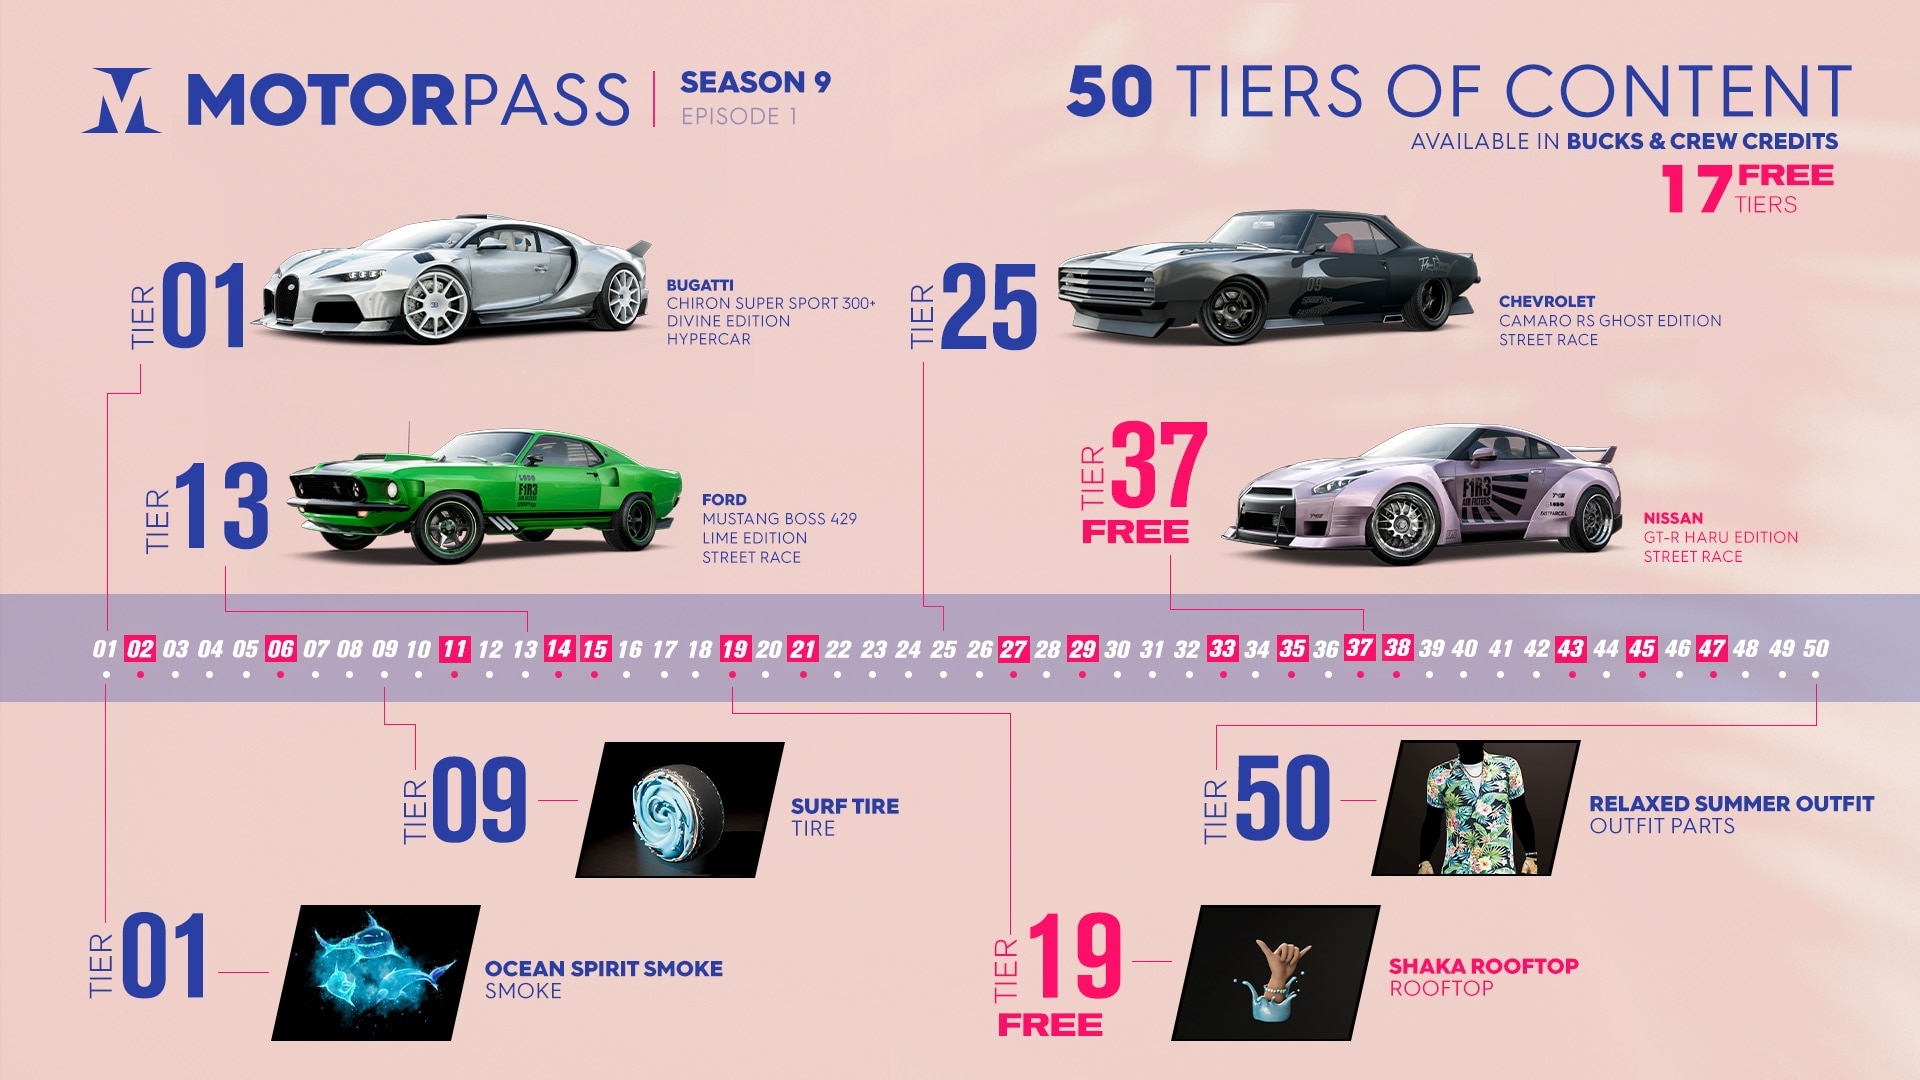 [TC2] S9 Content Overview - Motorpass Infographic